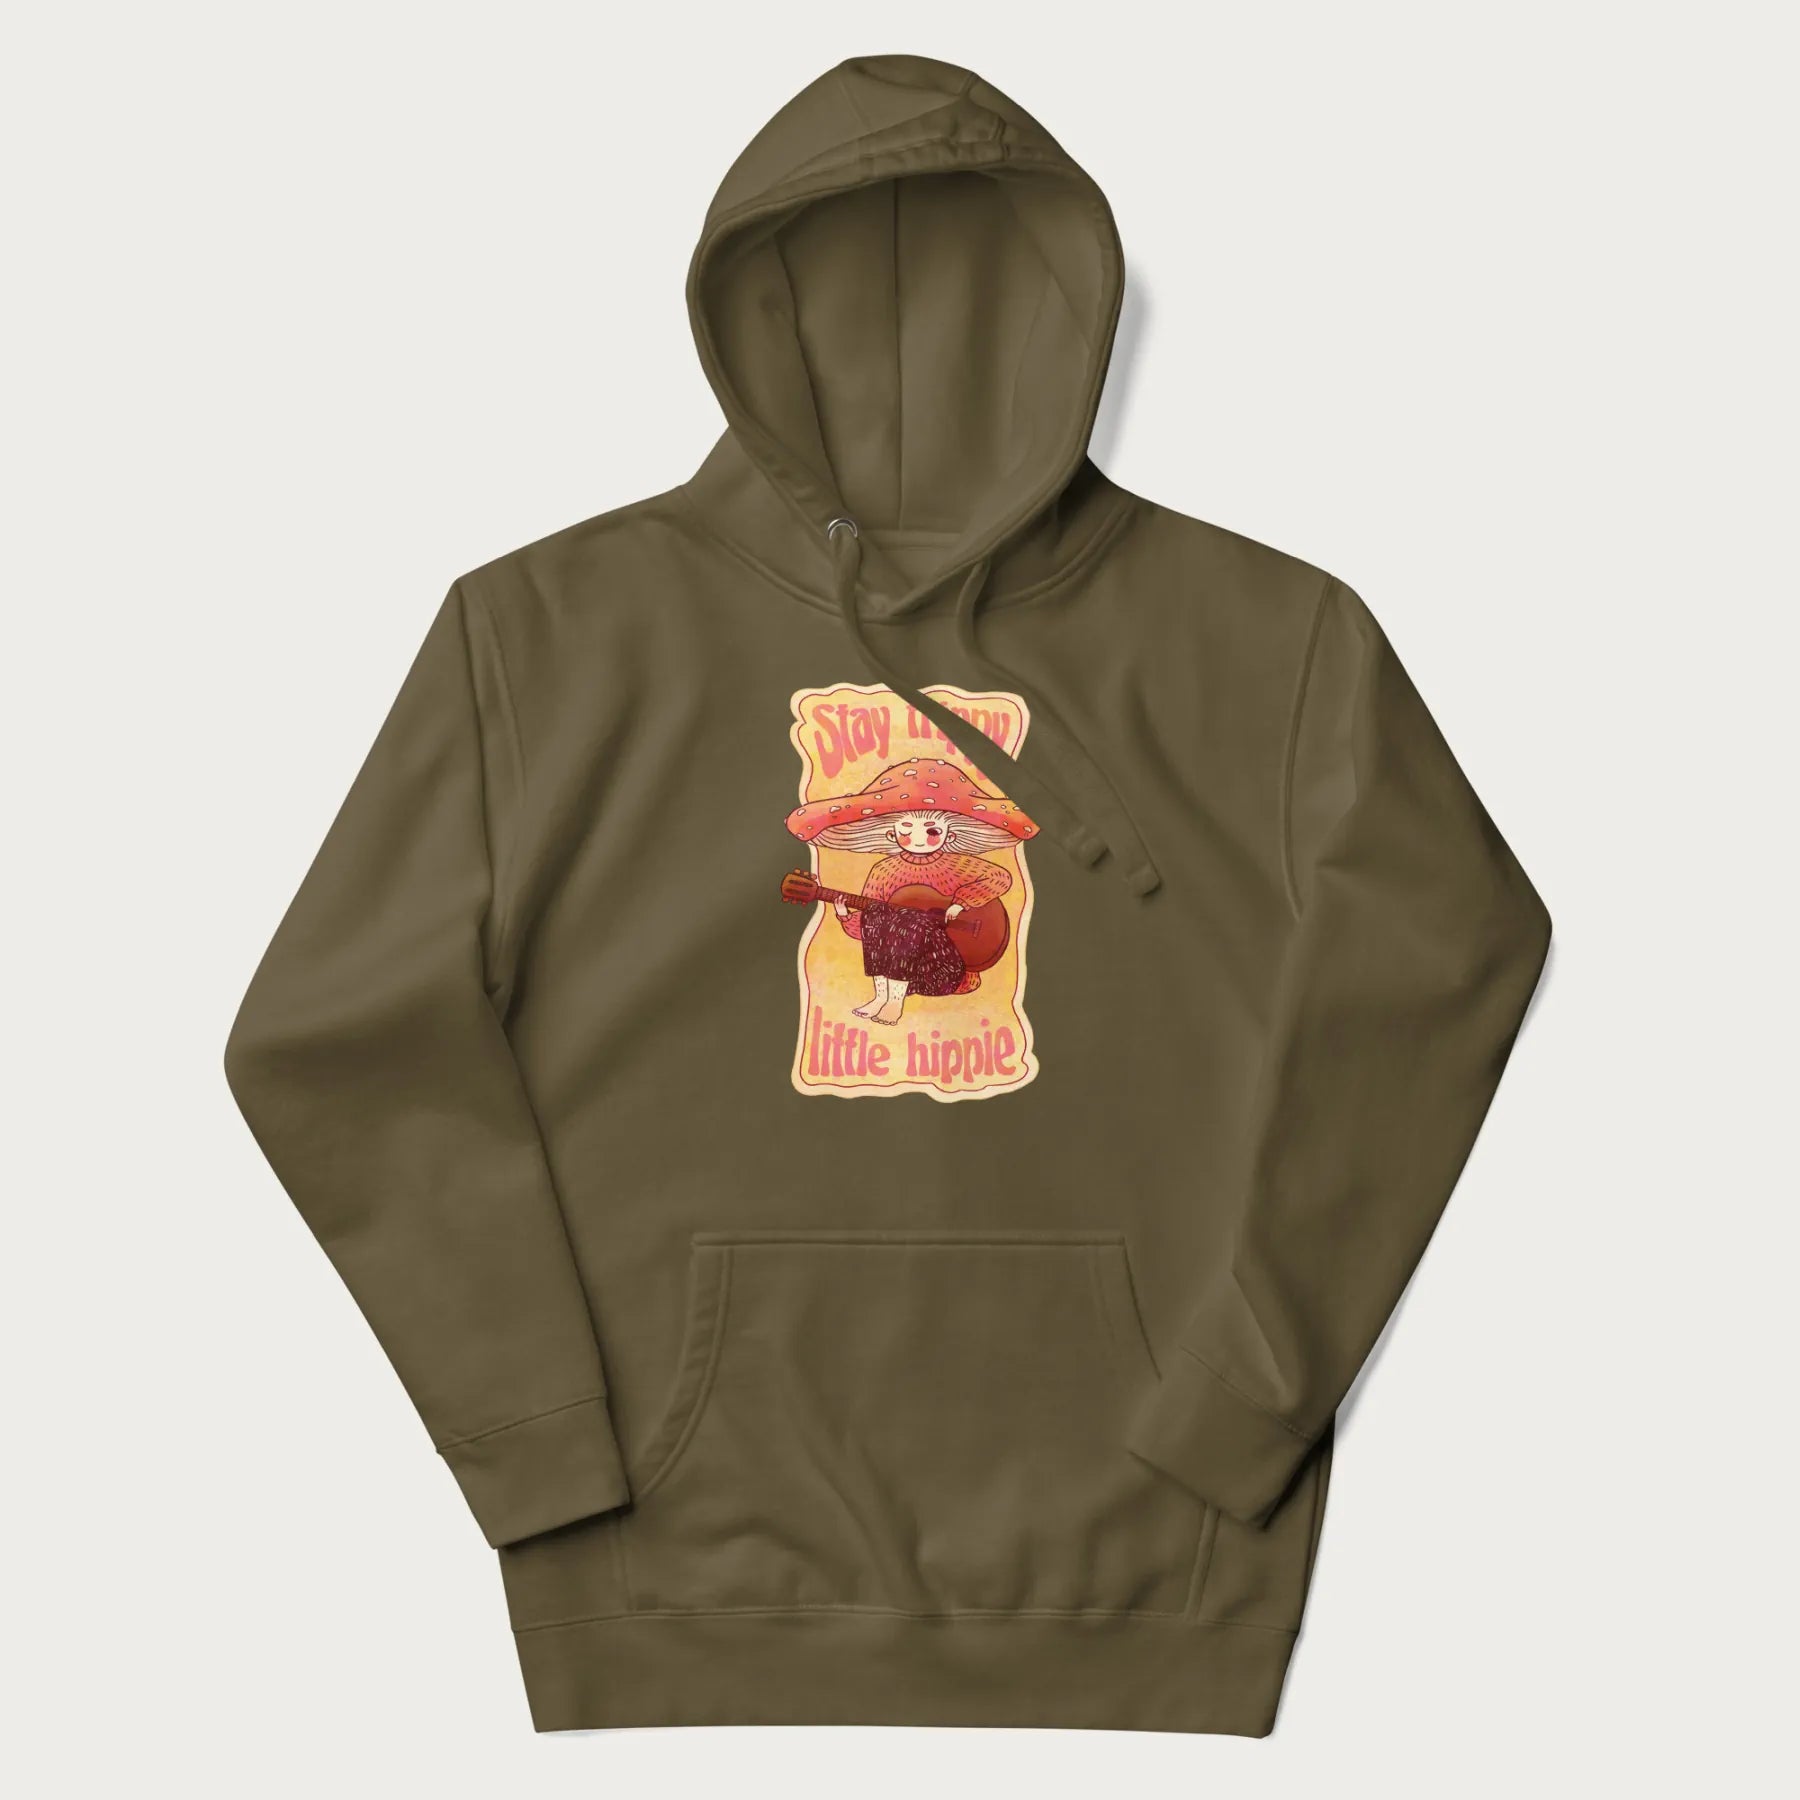 Military green hoodie with a graphic of a character with a mushroom cap playing a guitar and the text 'Stay Trippy Little Hippie.'